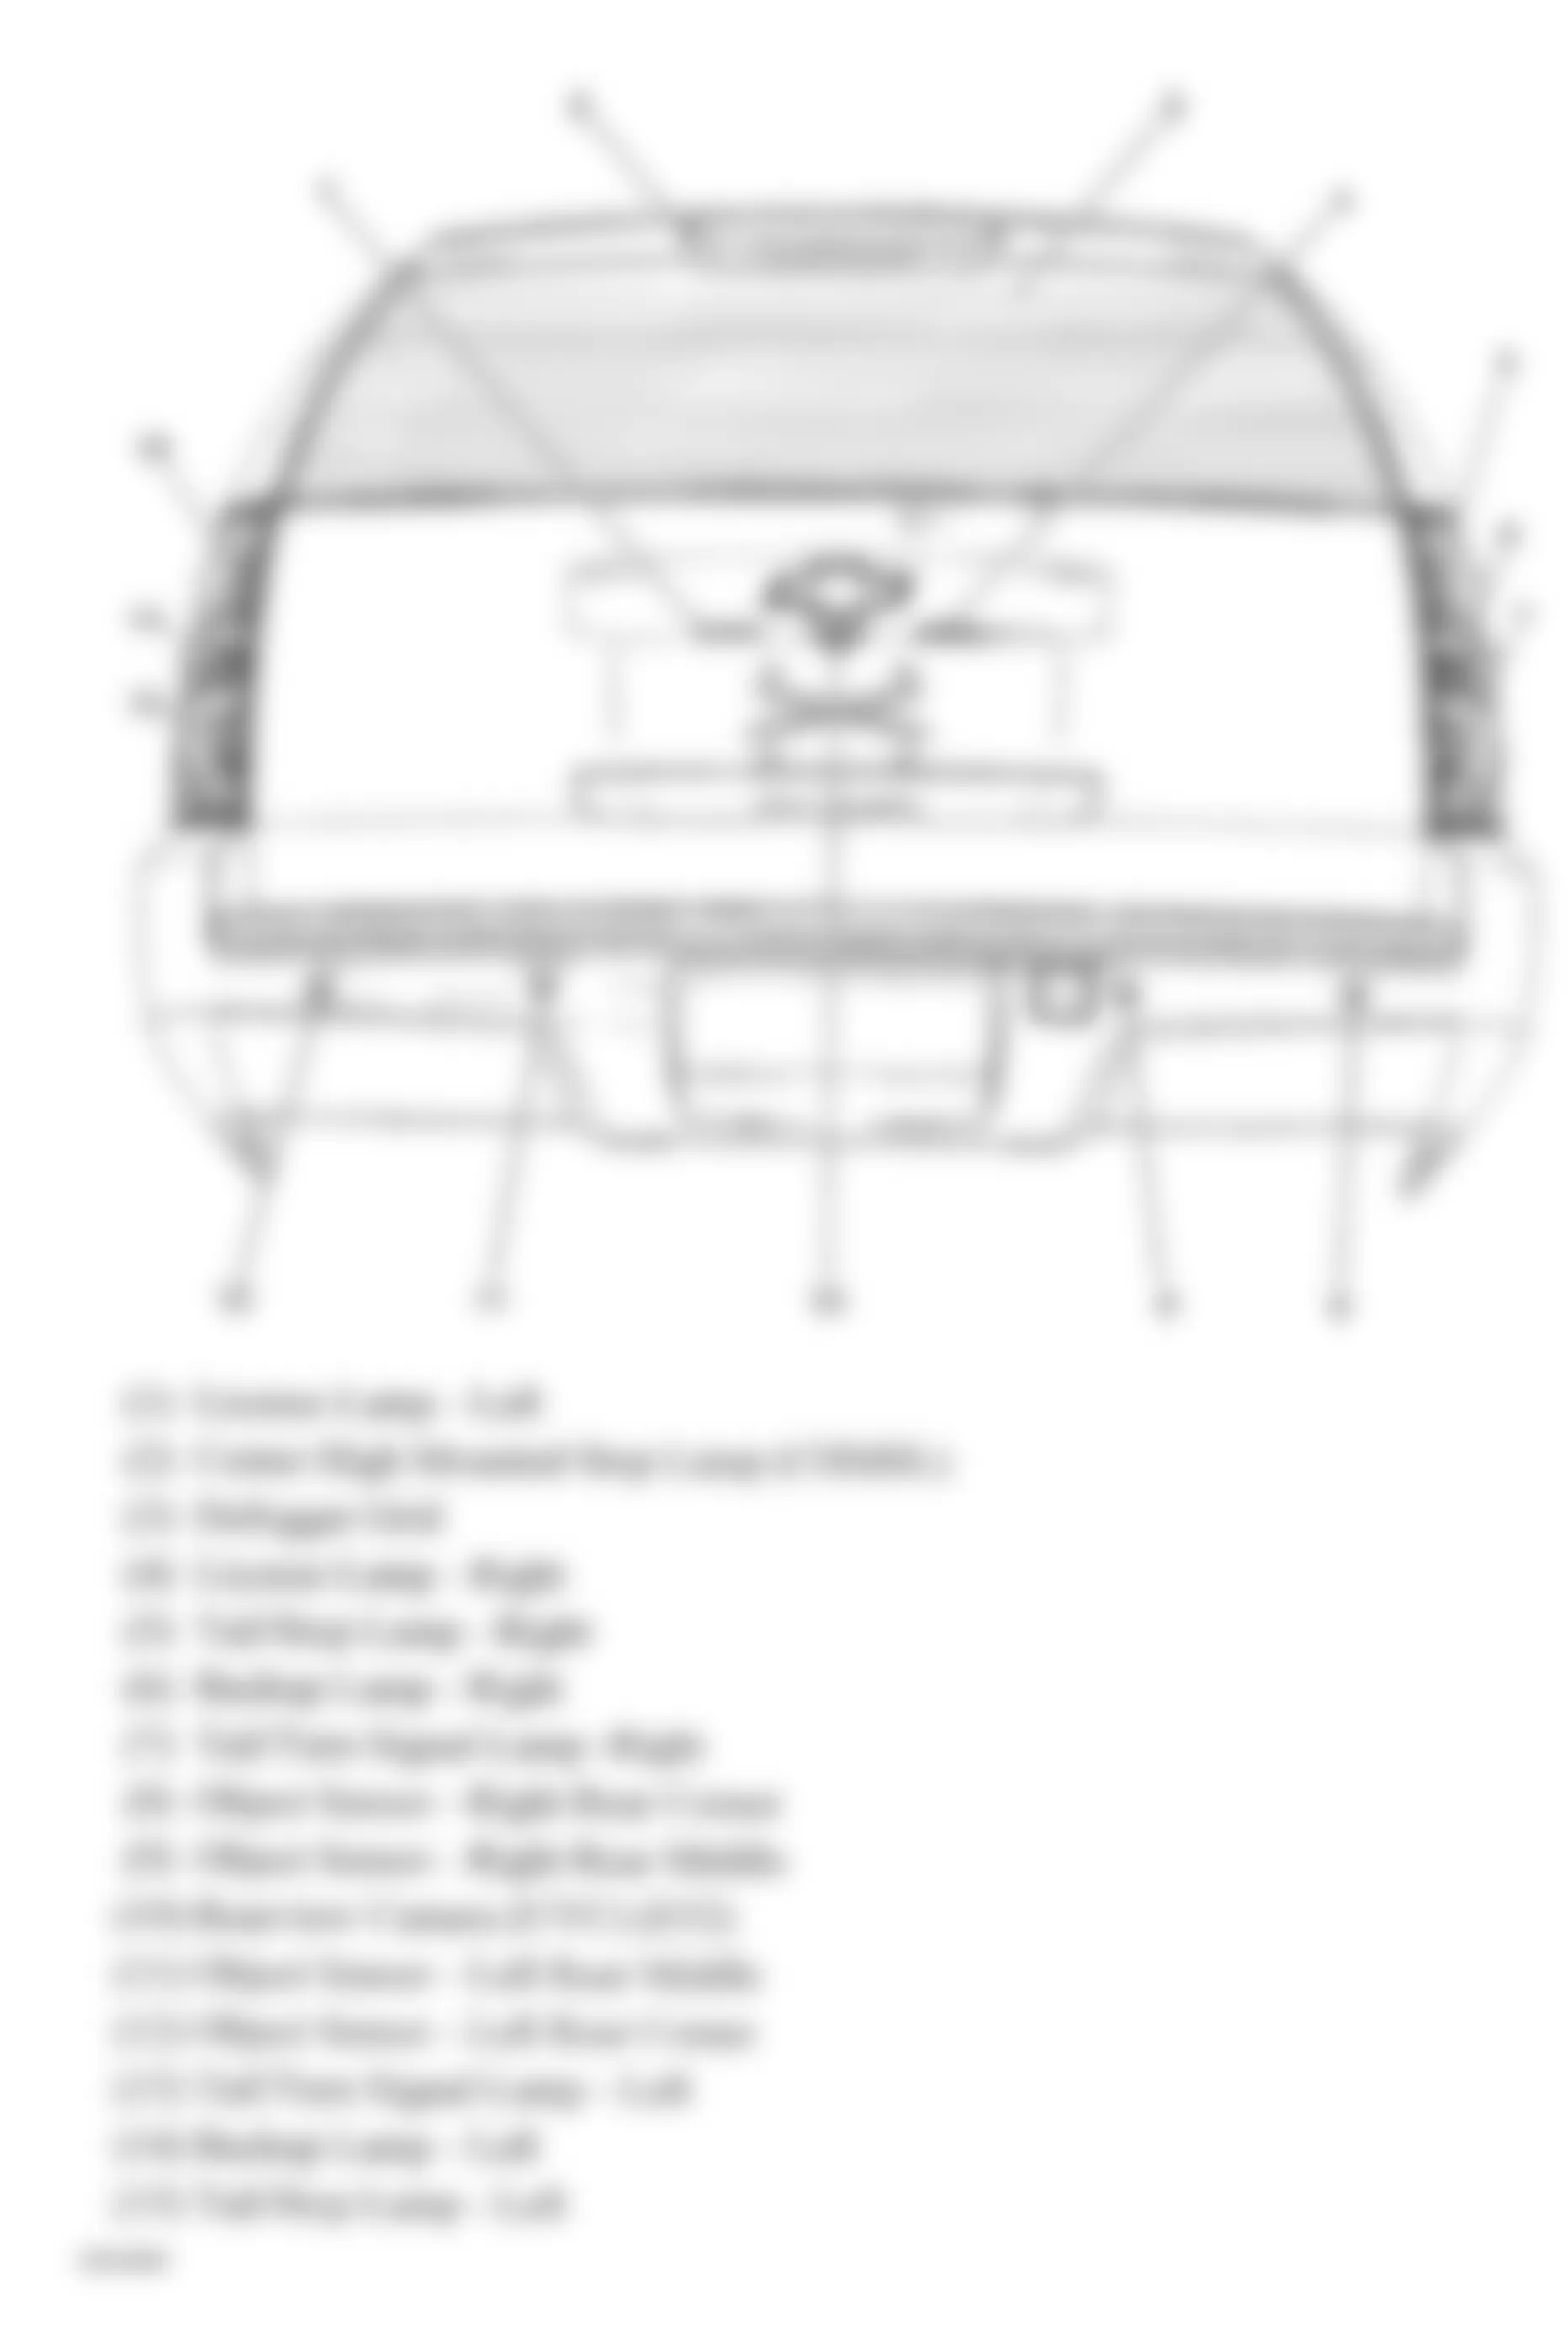 GMC Yukon Hybrid 2009 - Component Locations -  Rear Of Vehicle (Avalanche, Suburban & Tahoe W/One Piece Liftgate)